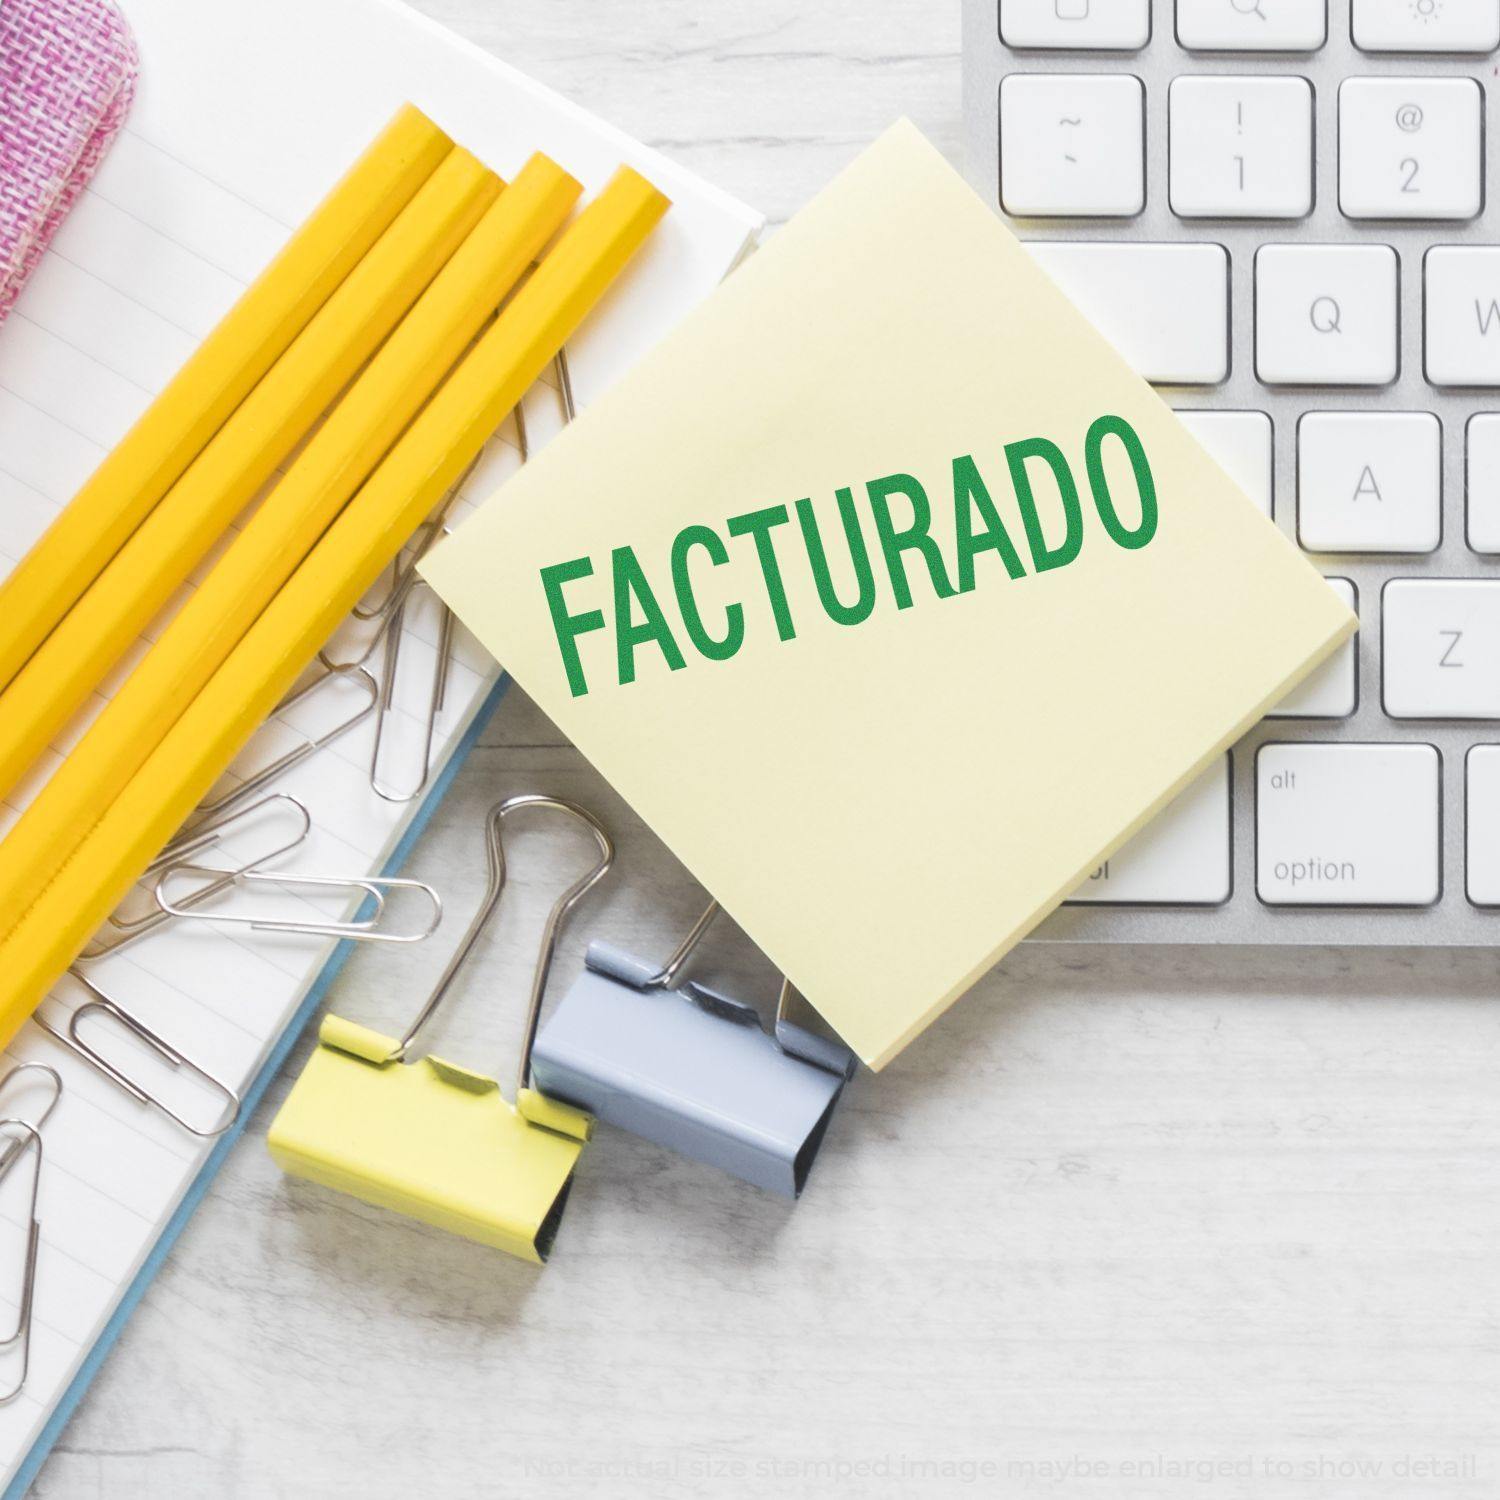 A self-inking stamp with a stamped image showing how the text "FACTURADO" is displayed after stamping.